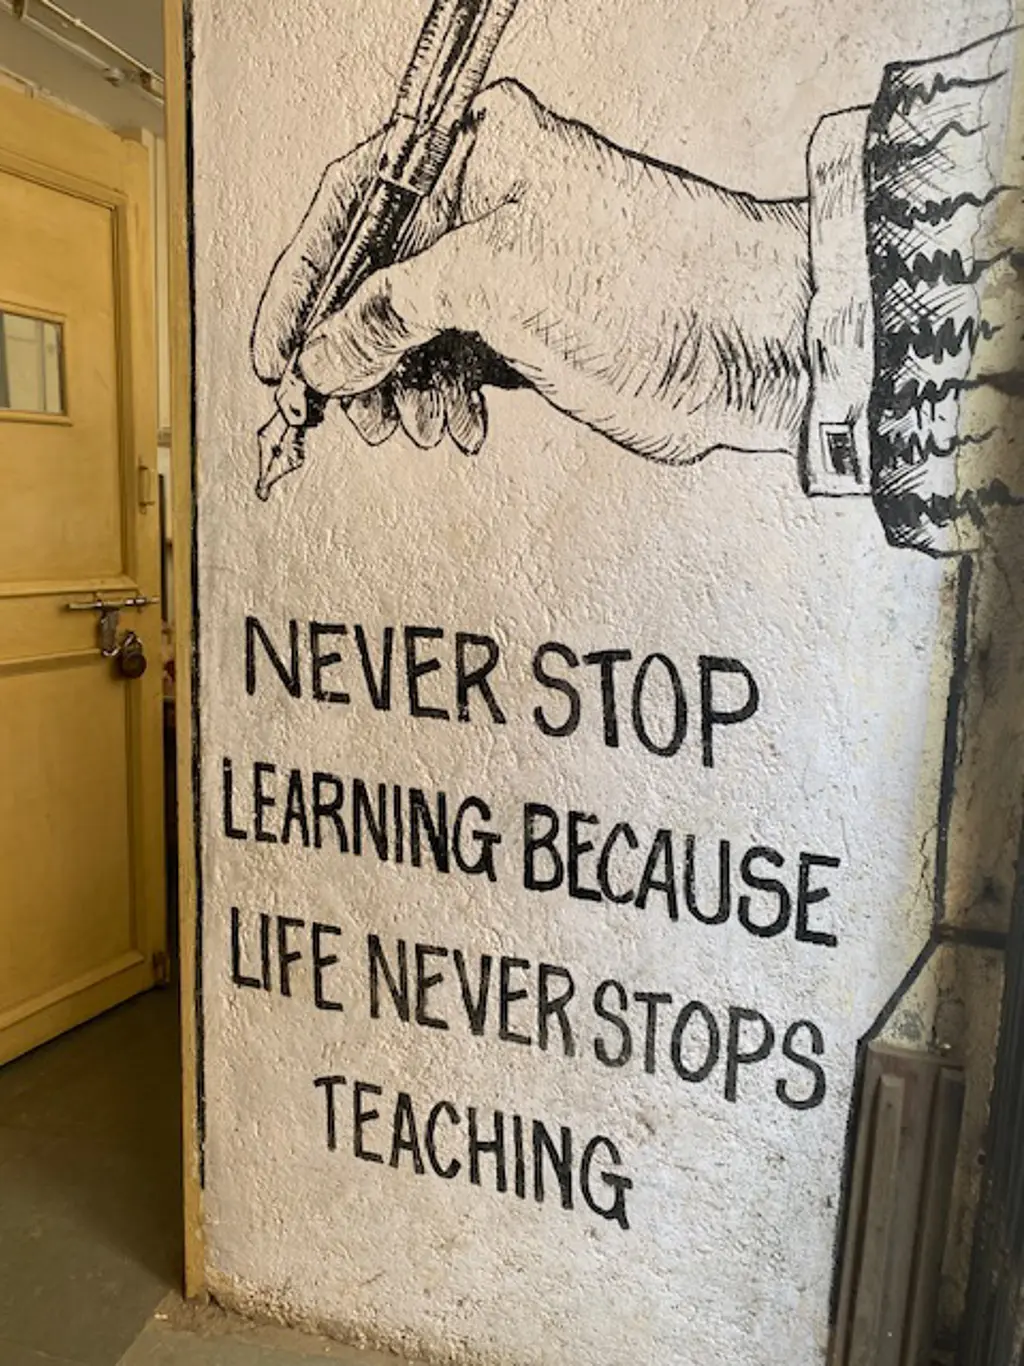 A painted sign that says "Never Stop Learning Because Life Never Stops Teaching."